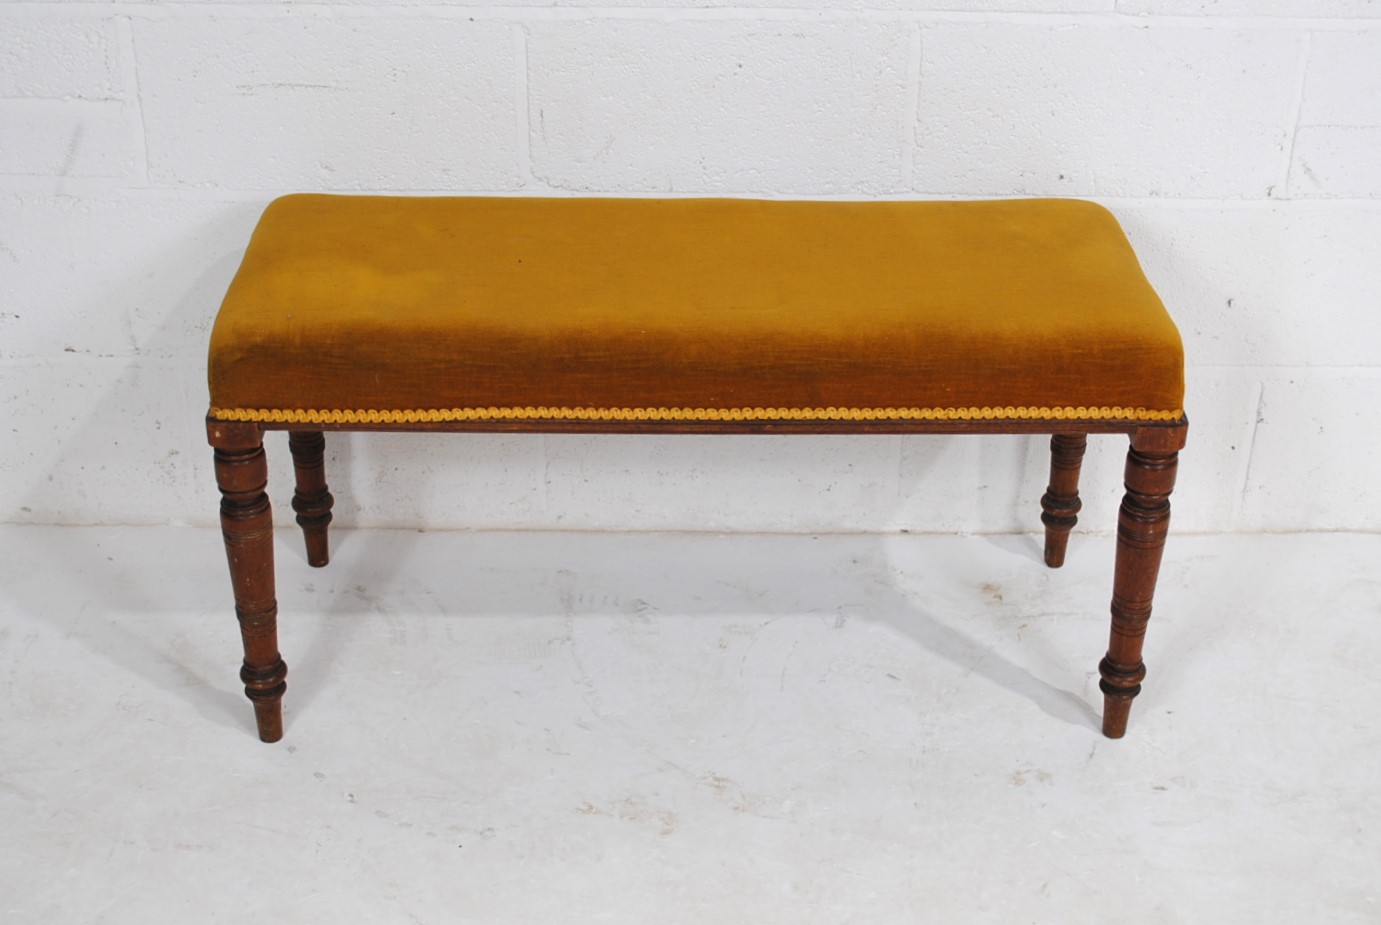 A Victorian upholstered duet stool, raised on turned mahogany legs - length 99cm, height 51cm